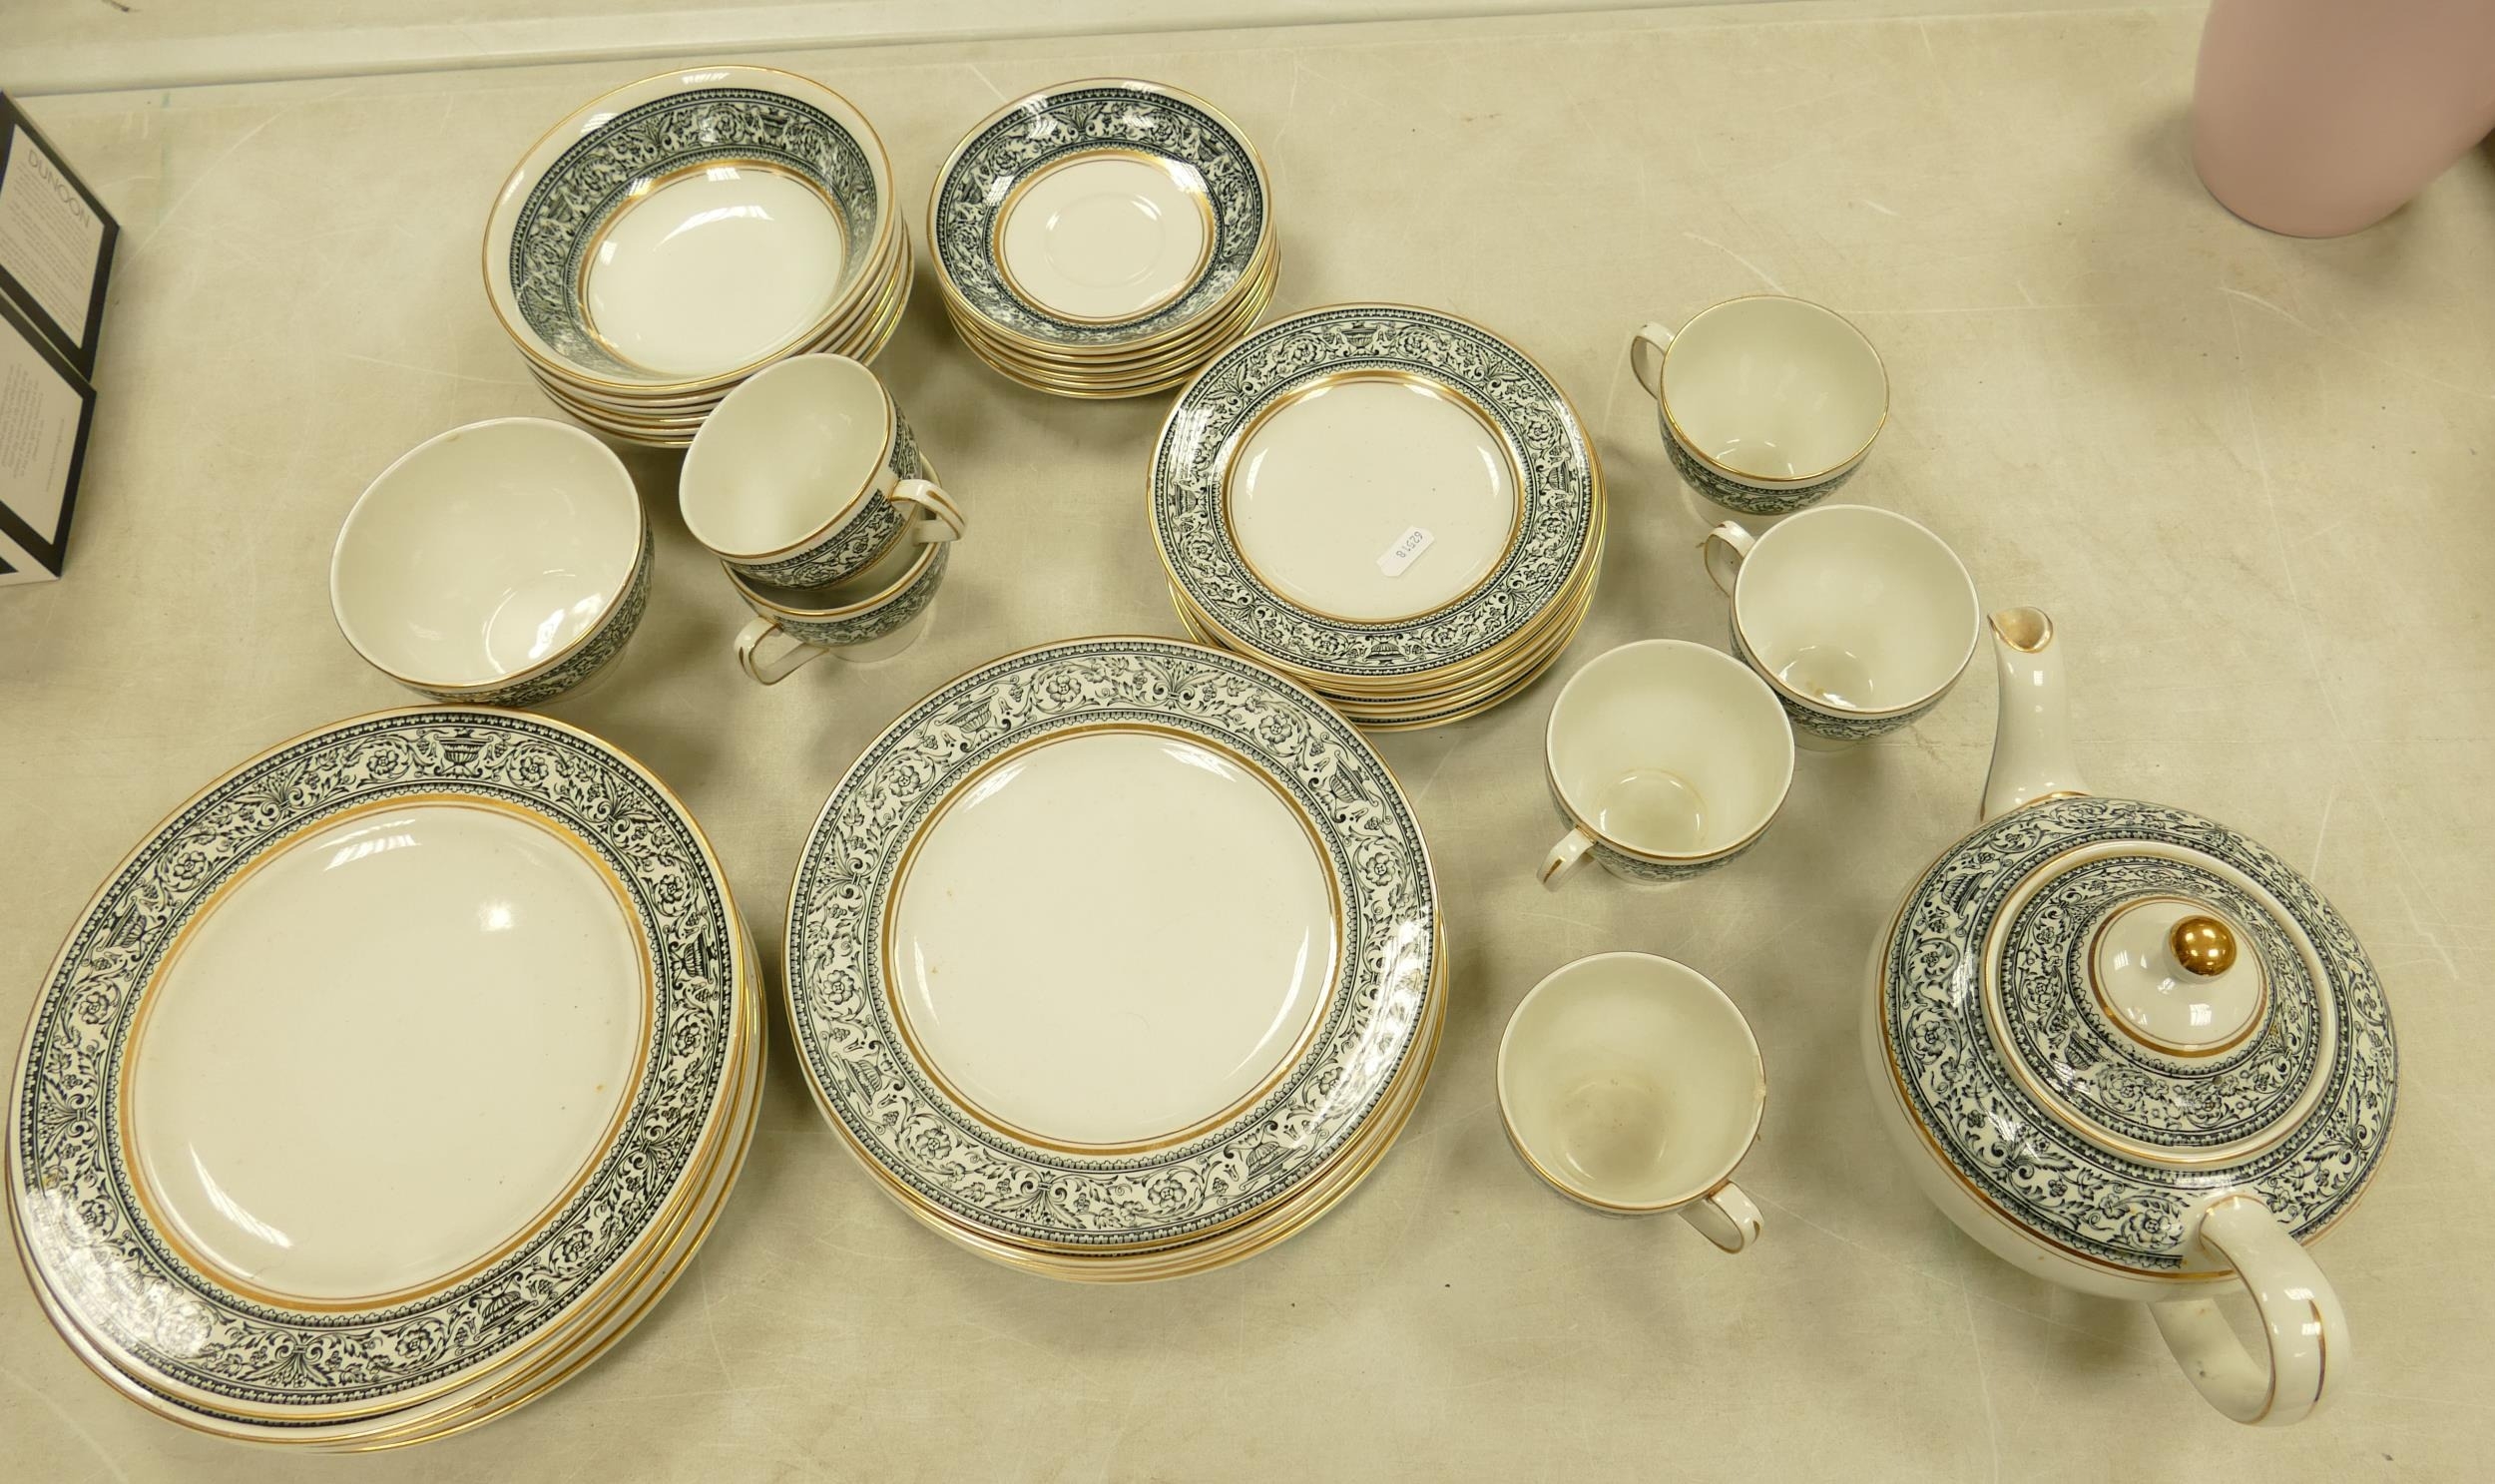 Woods and Sons Saracen patterned tea and dinner ware to include bowls, dinner plates, salad